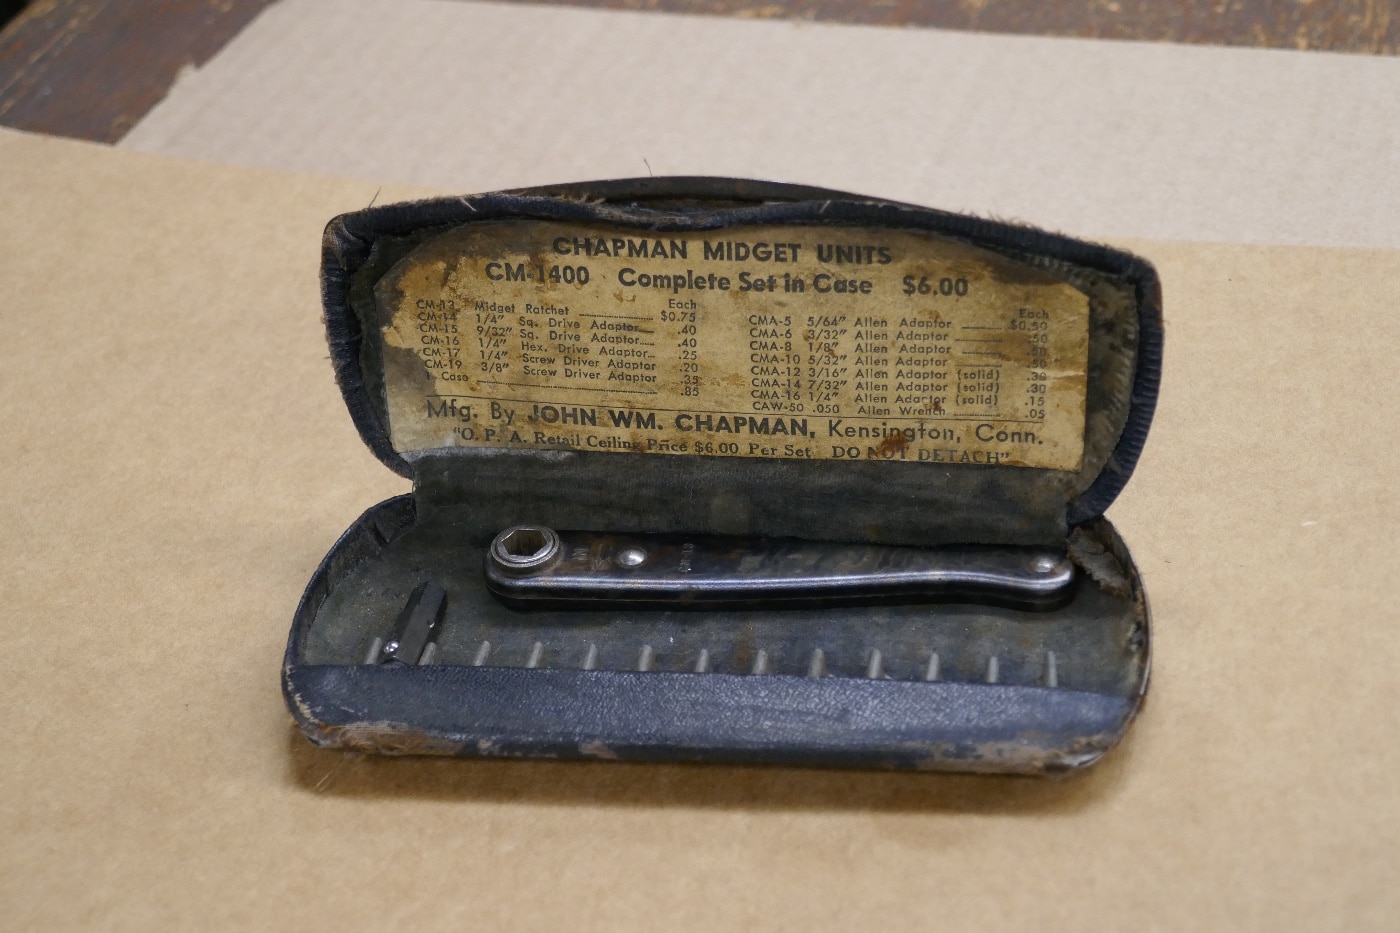 Part of the company's collection of it's tools is the above Chapman CM 1400 tool kit from World War II.